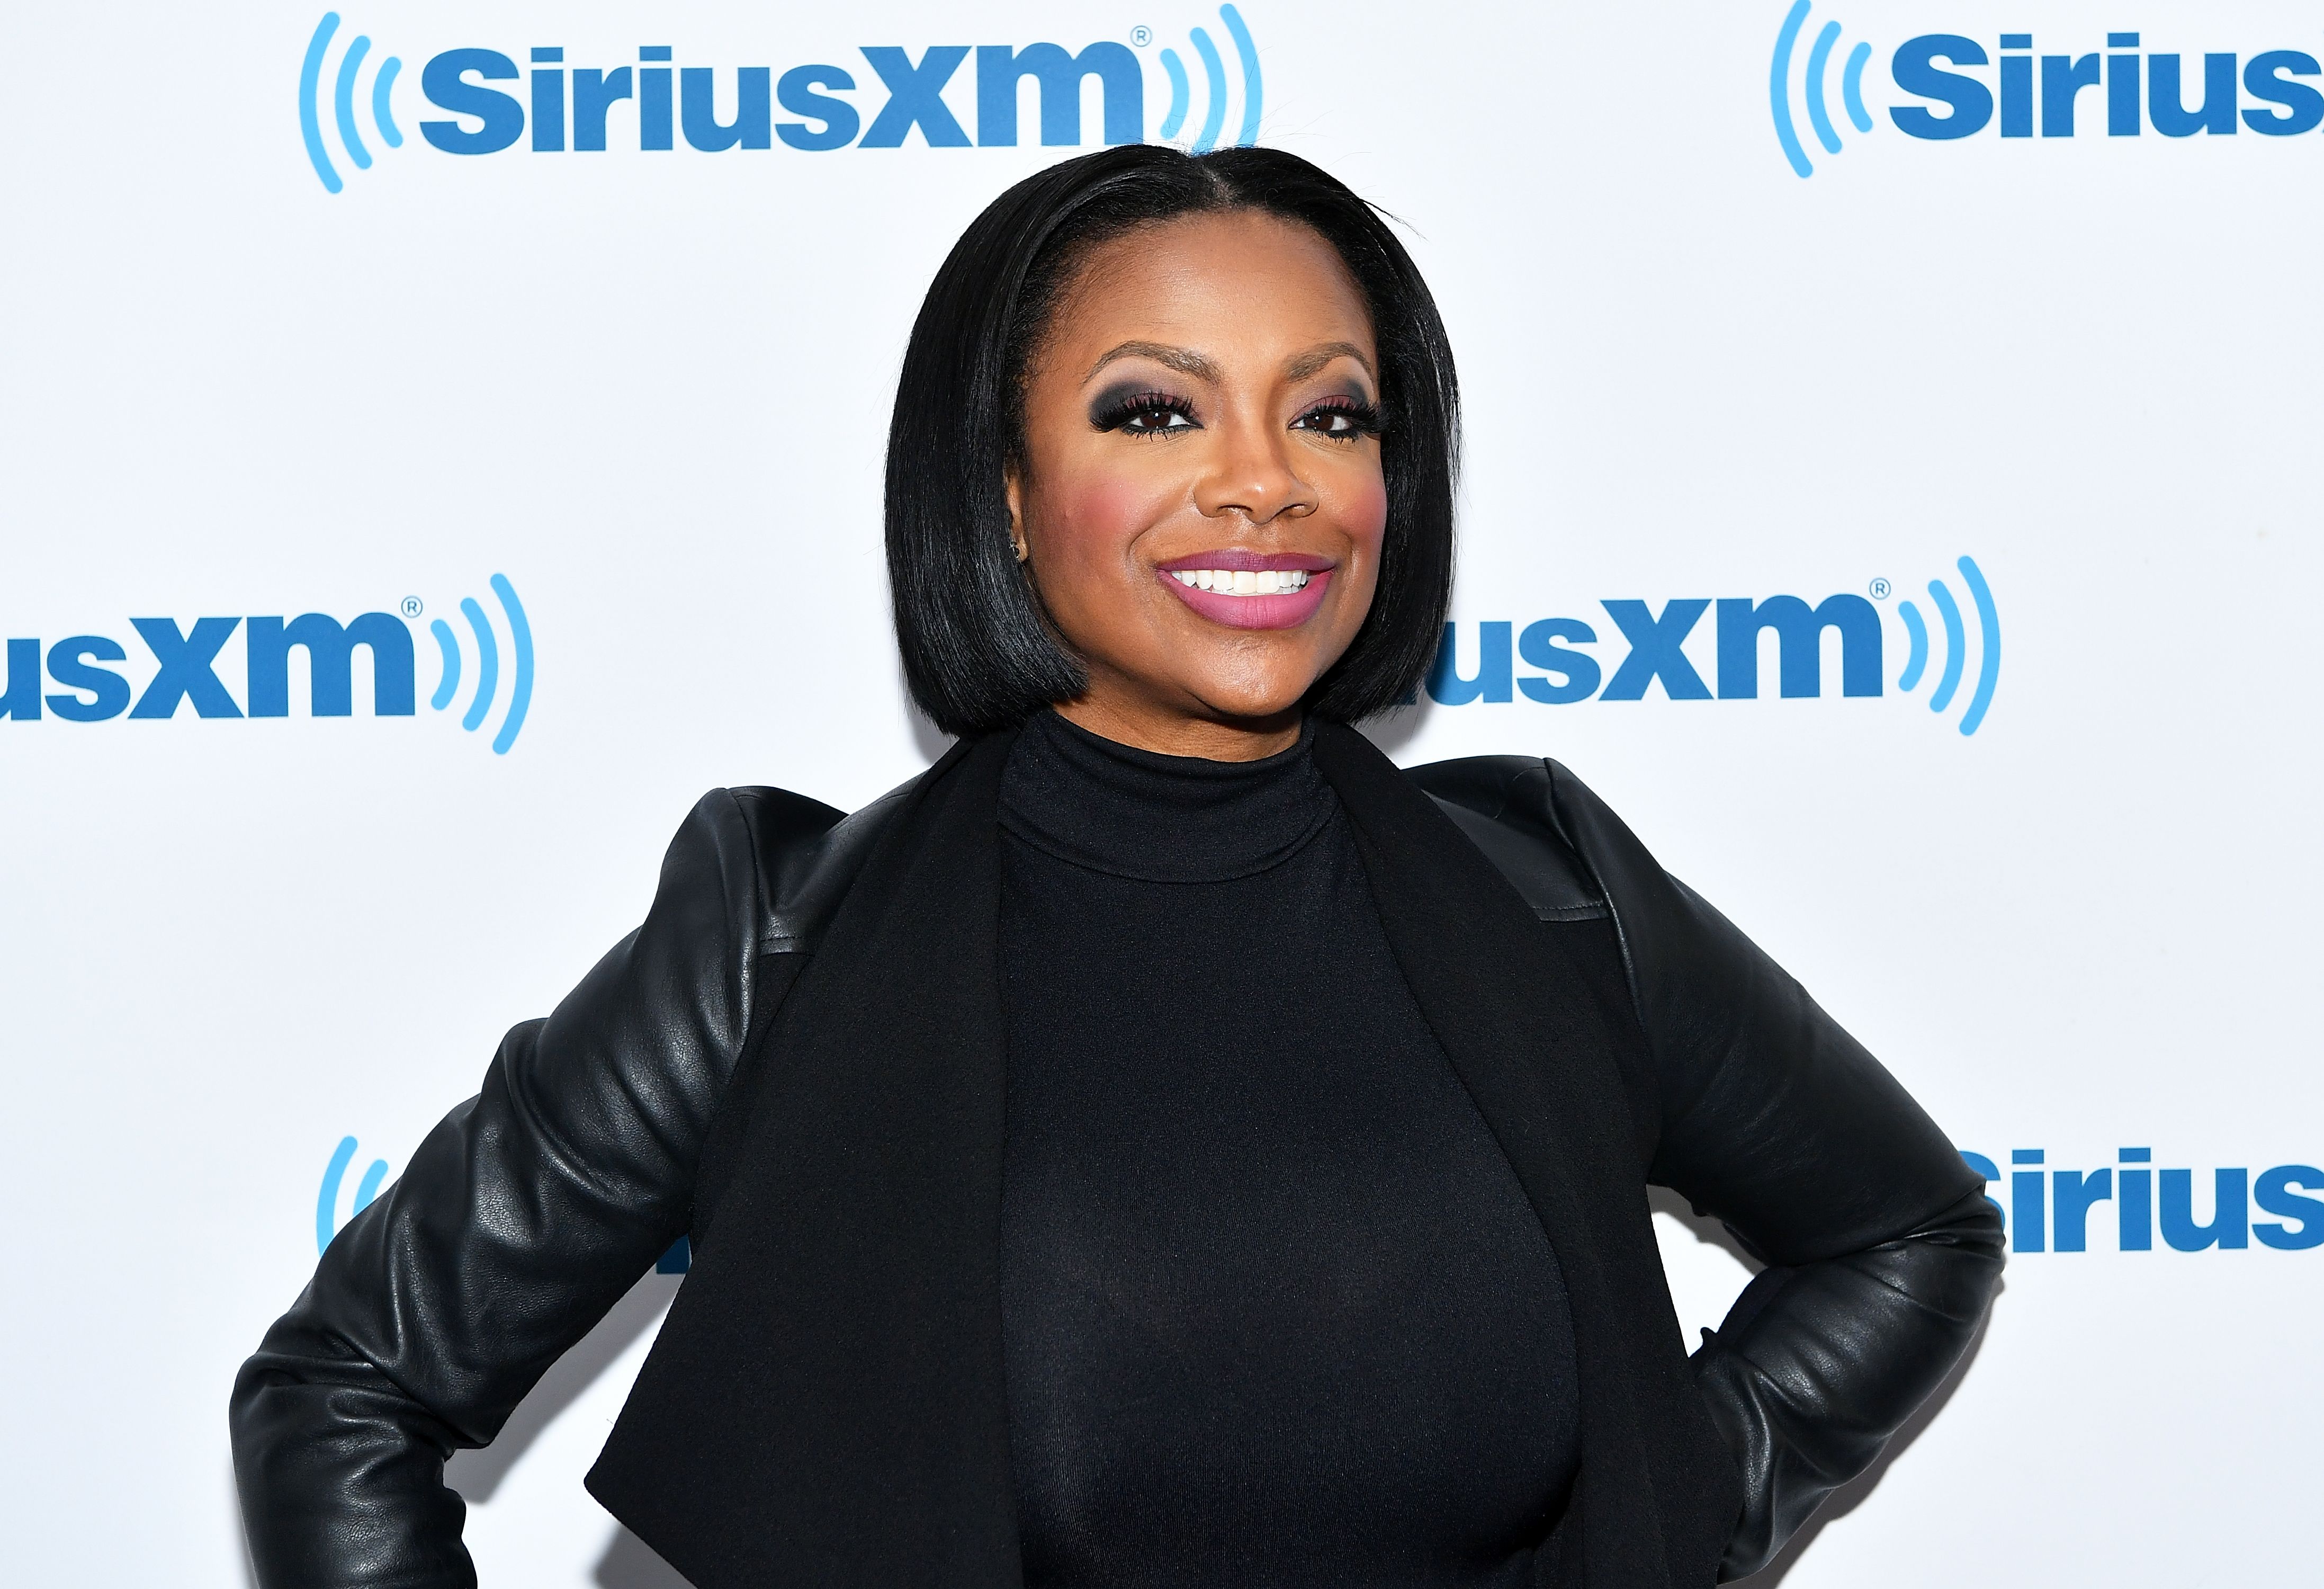 Singer/songwriter and TV personality Kandi Burruss at SiriusXM Studios on March 5, 2018 | Photo: Getty Images